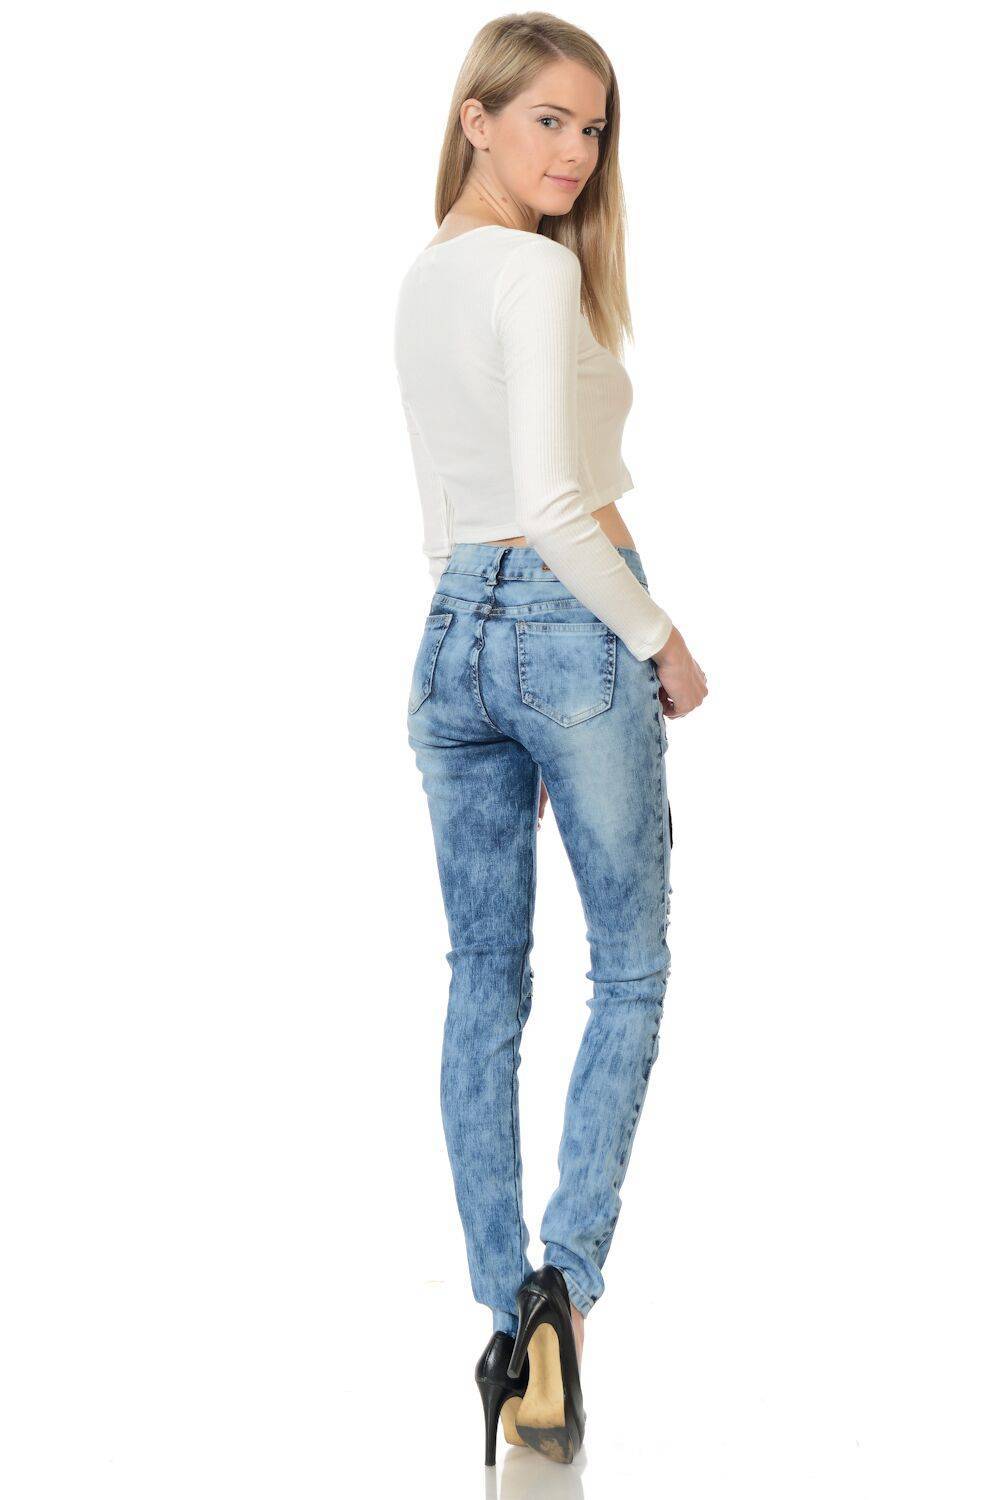 Sweet Look Premium Edition Womens Jeans Sizing 0-15 -9736